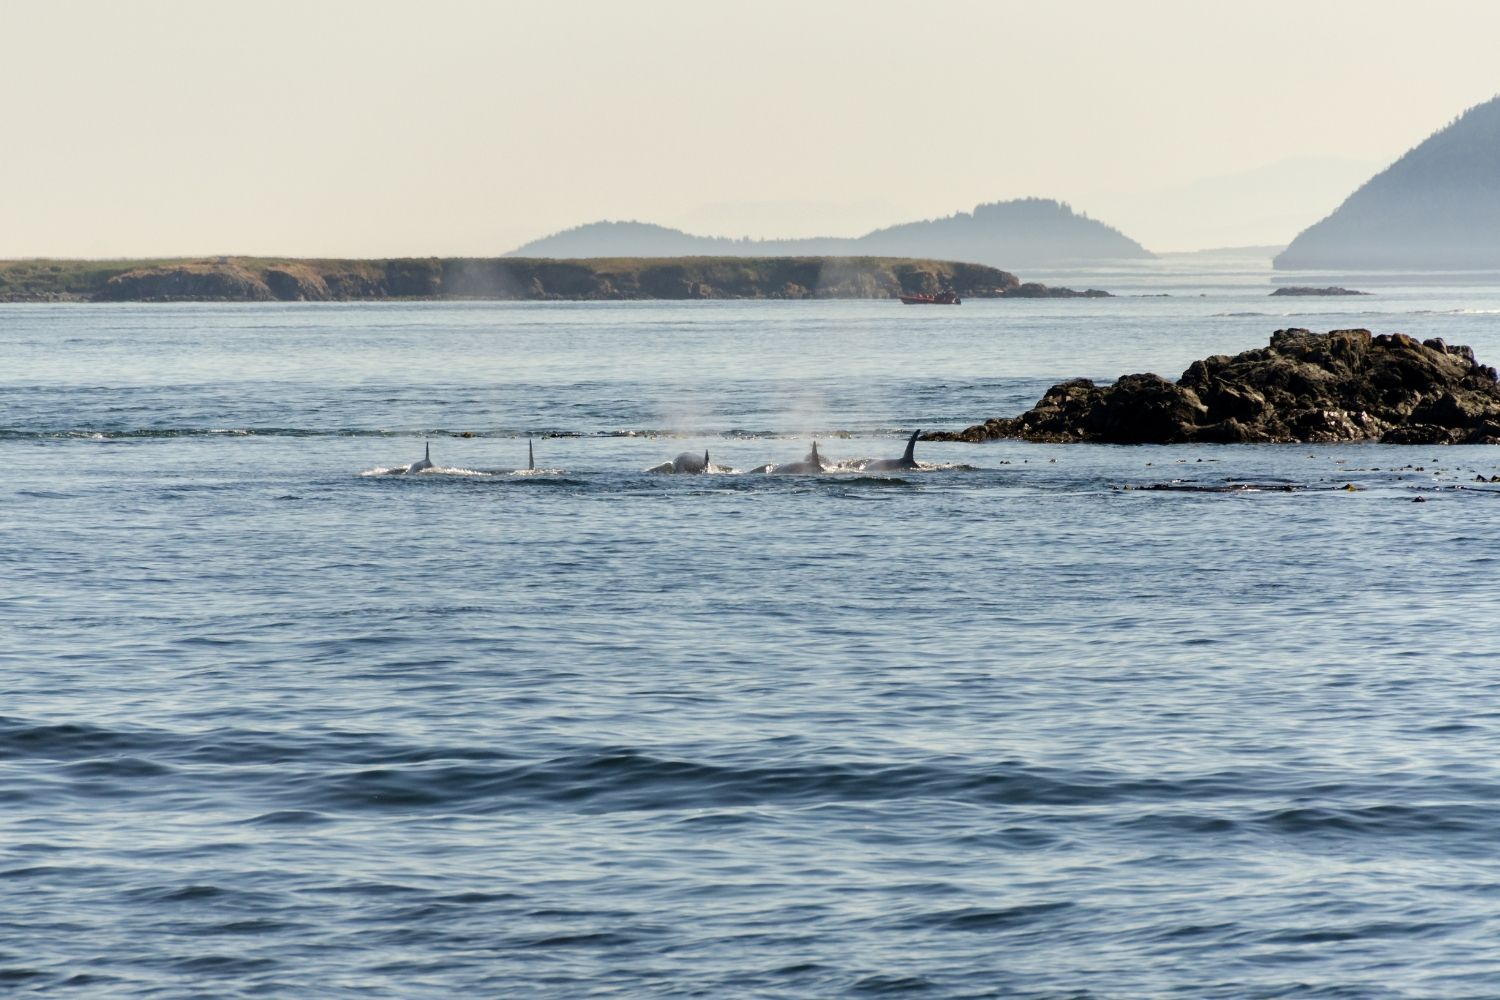 Orcas in Vancouver